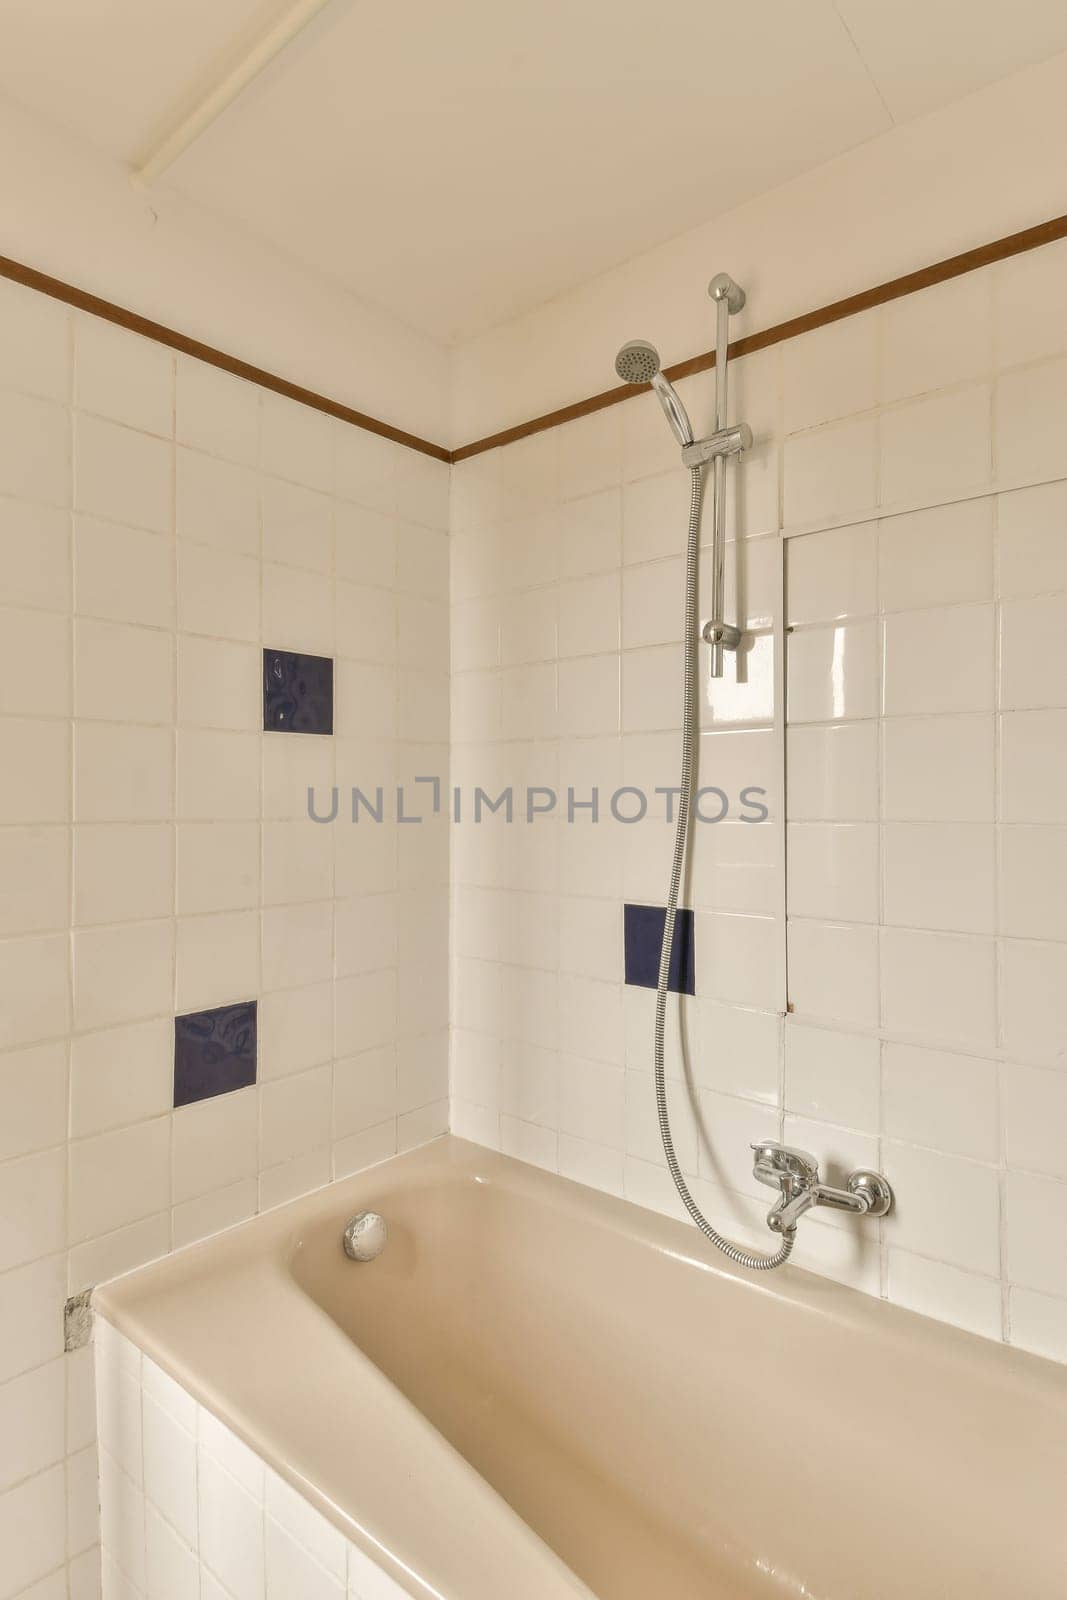 a bathroom with white tiles and wood trim around the tub, which has been used as a shower stall for people to use